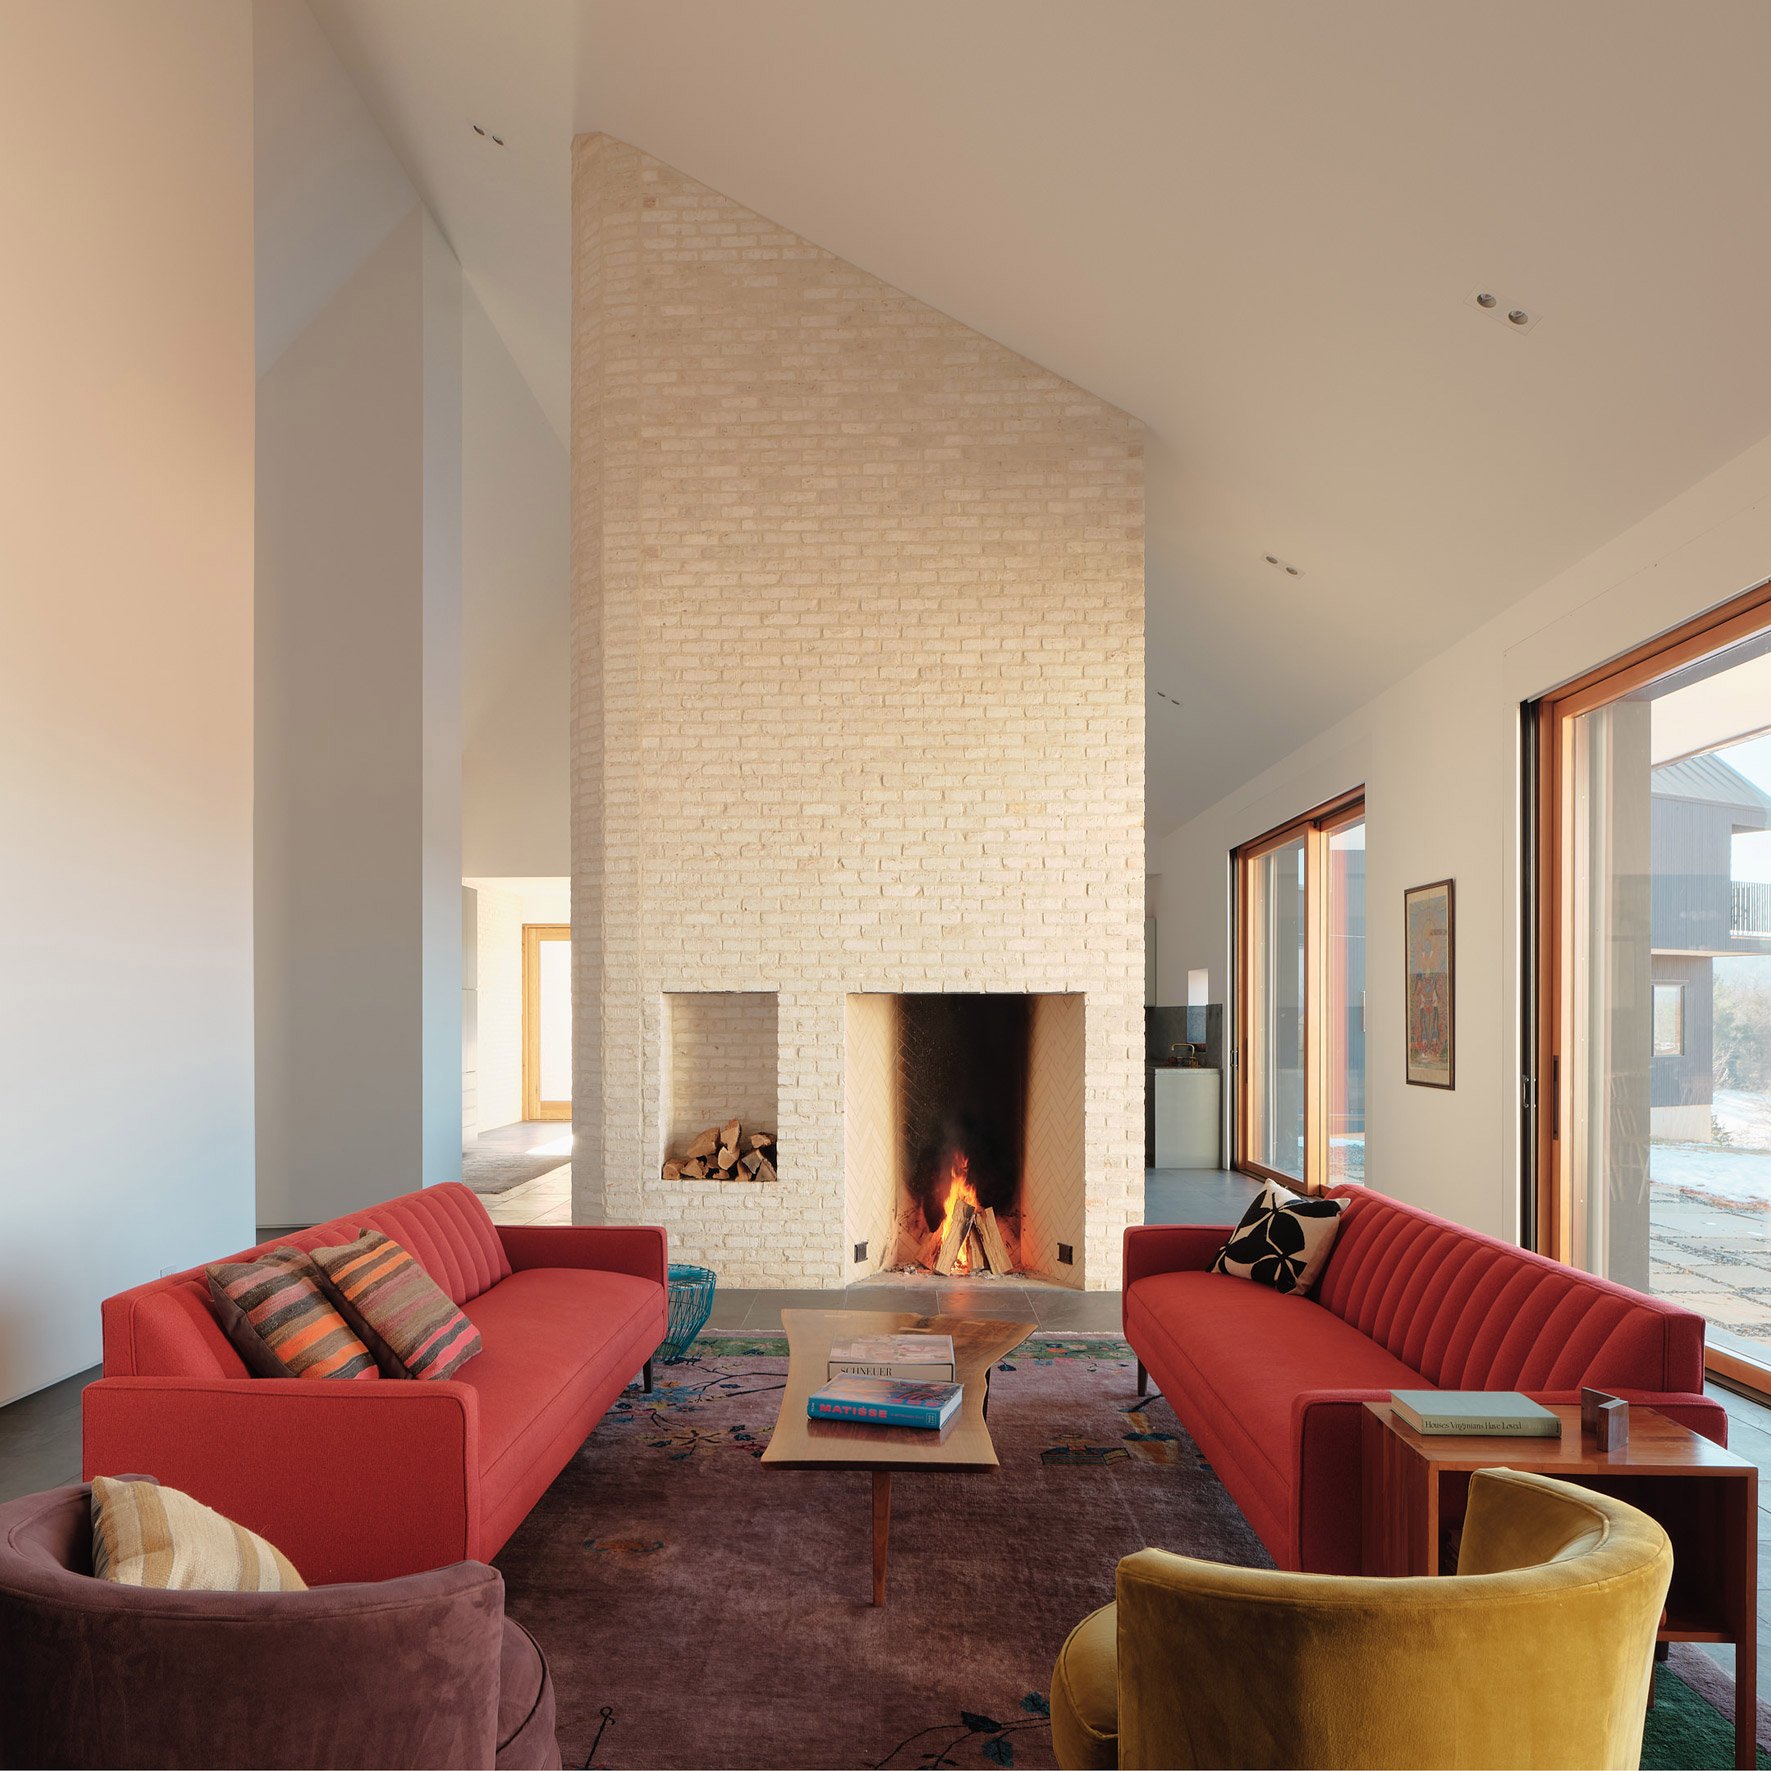 Ten welcoming living rooms where the fireplace takes centre stage